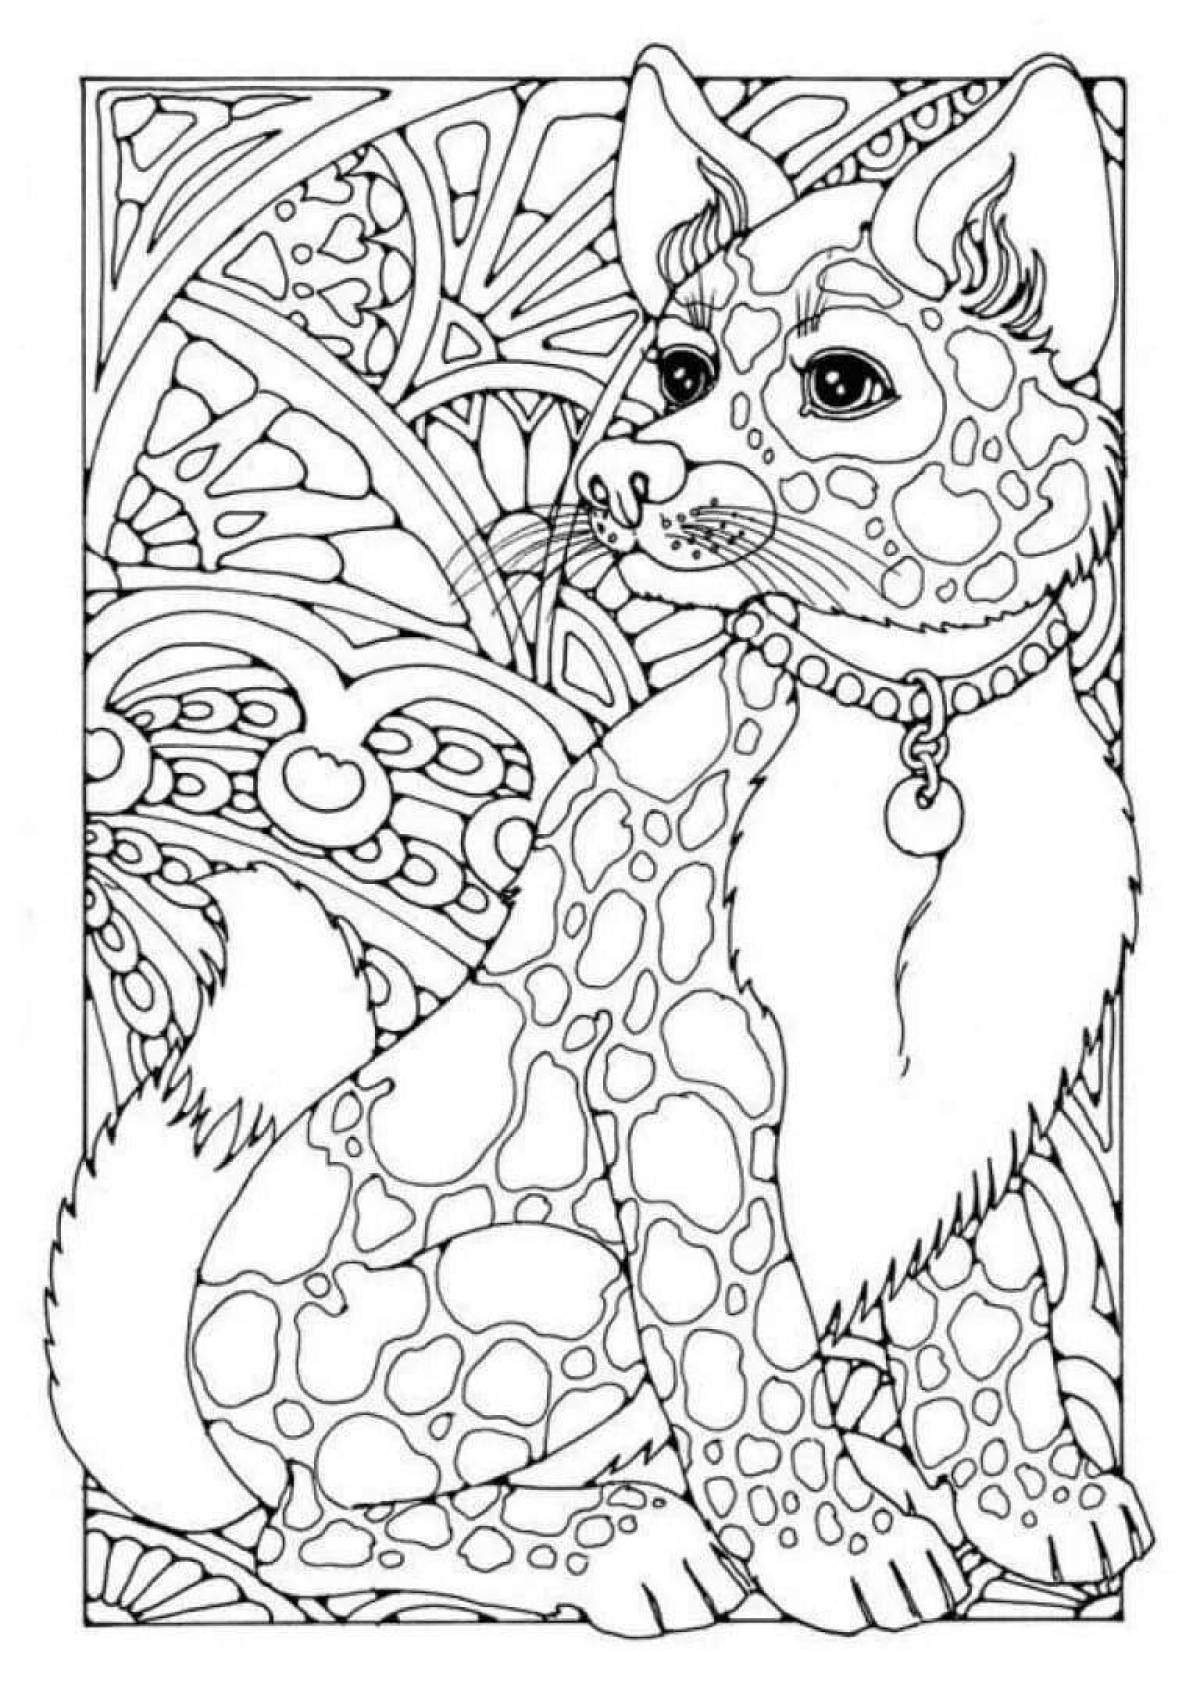 Violent coloring for girls 9-10 years old - very beautiful animals